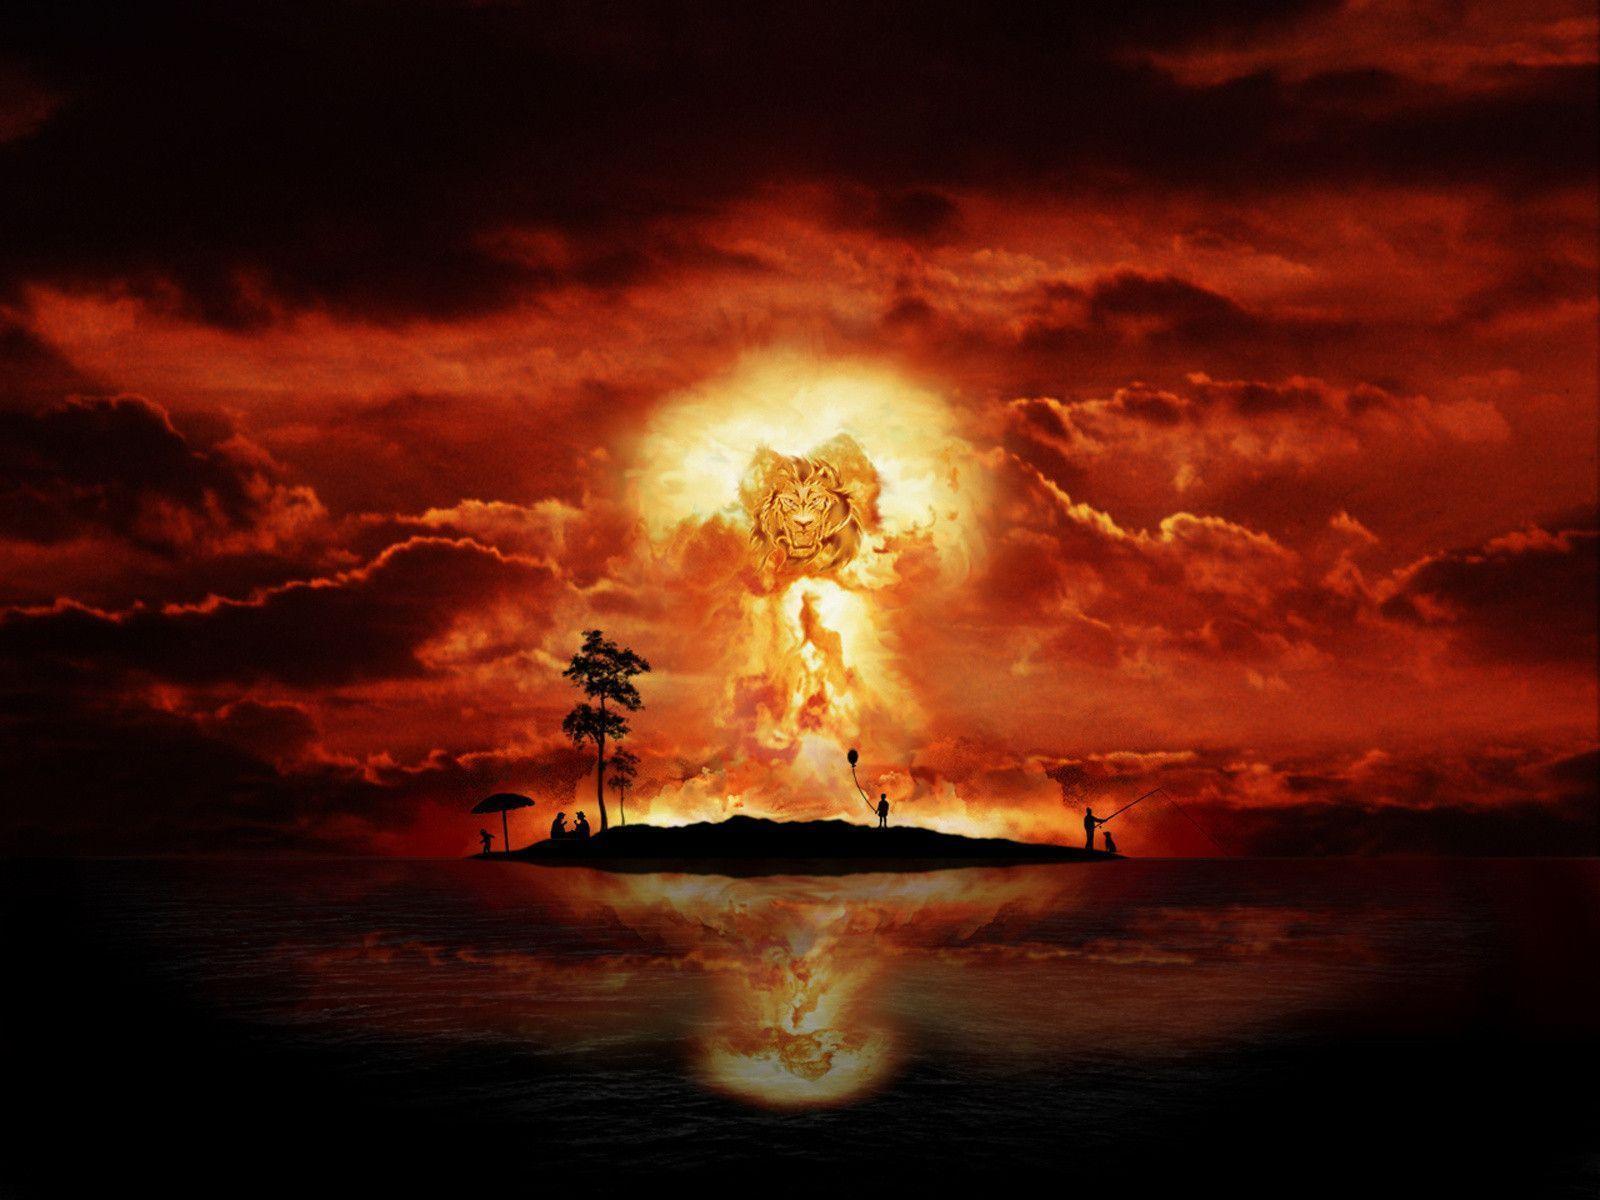 Nuclear Bomb Wallpapers - Wallpaper Cave